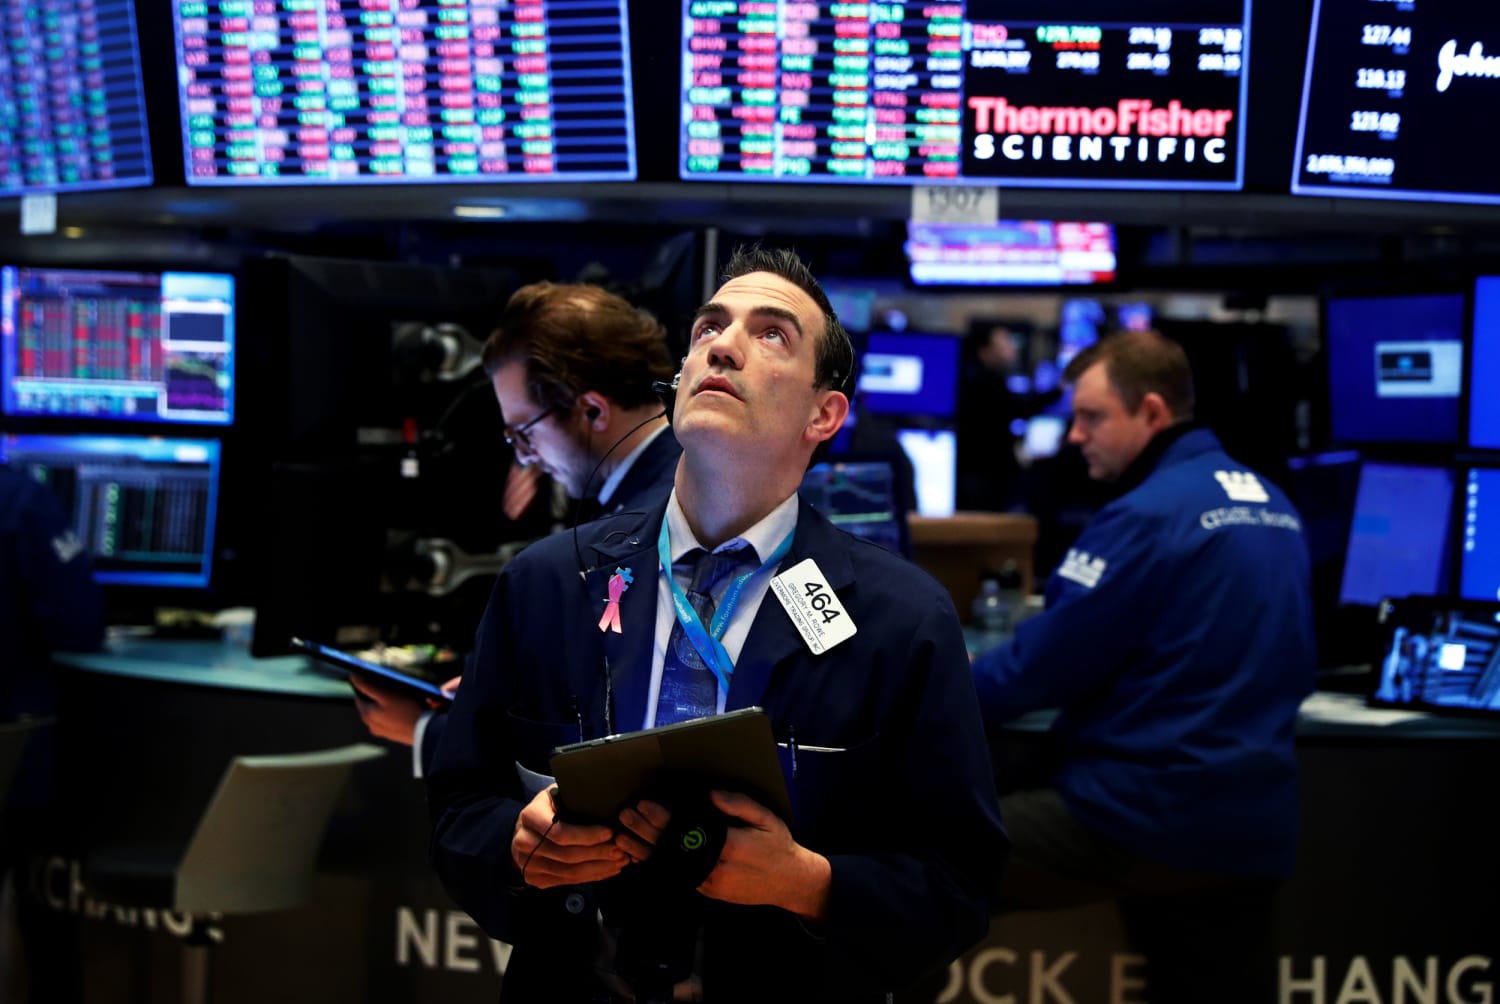 NYSE to Offer Reimbursements for Brokerage Claims After Technical Issue